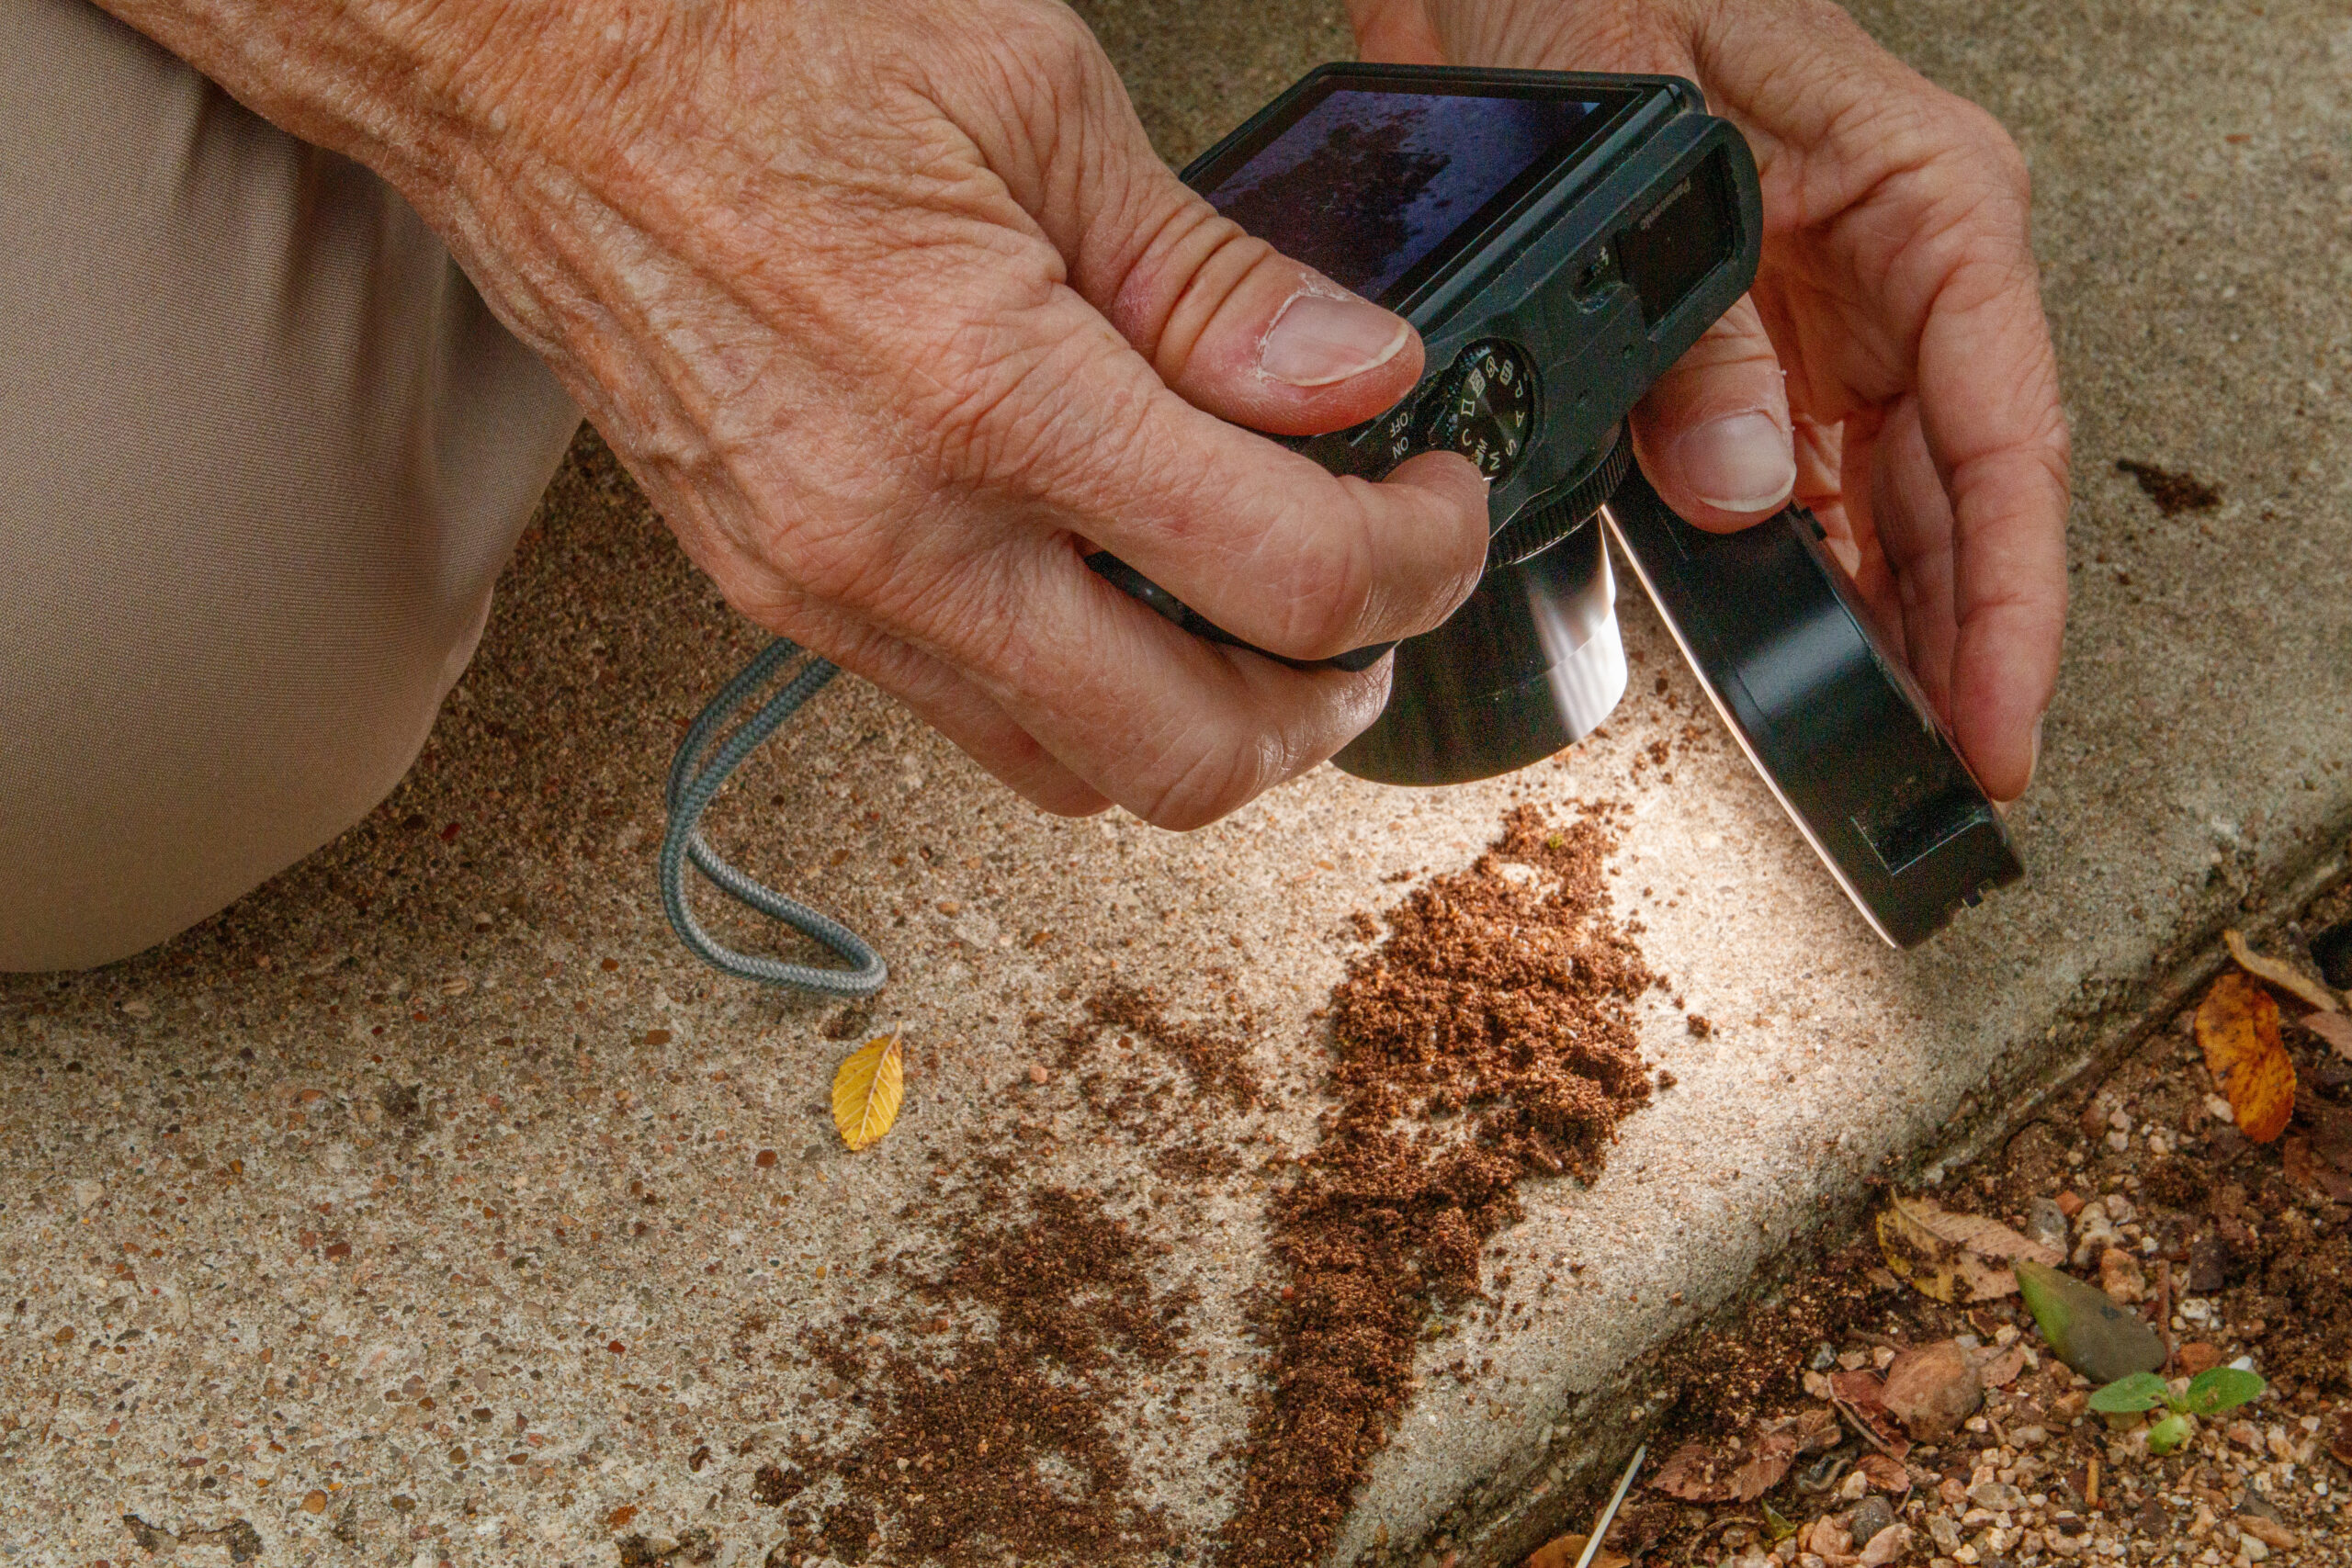 The hands of an older white woman, Valerie Bugh, as she holds a digital camera and LED light up close to some dirt on a walkway, with a tiny, mite-like insect in it.